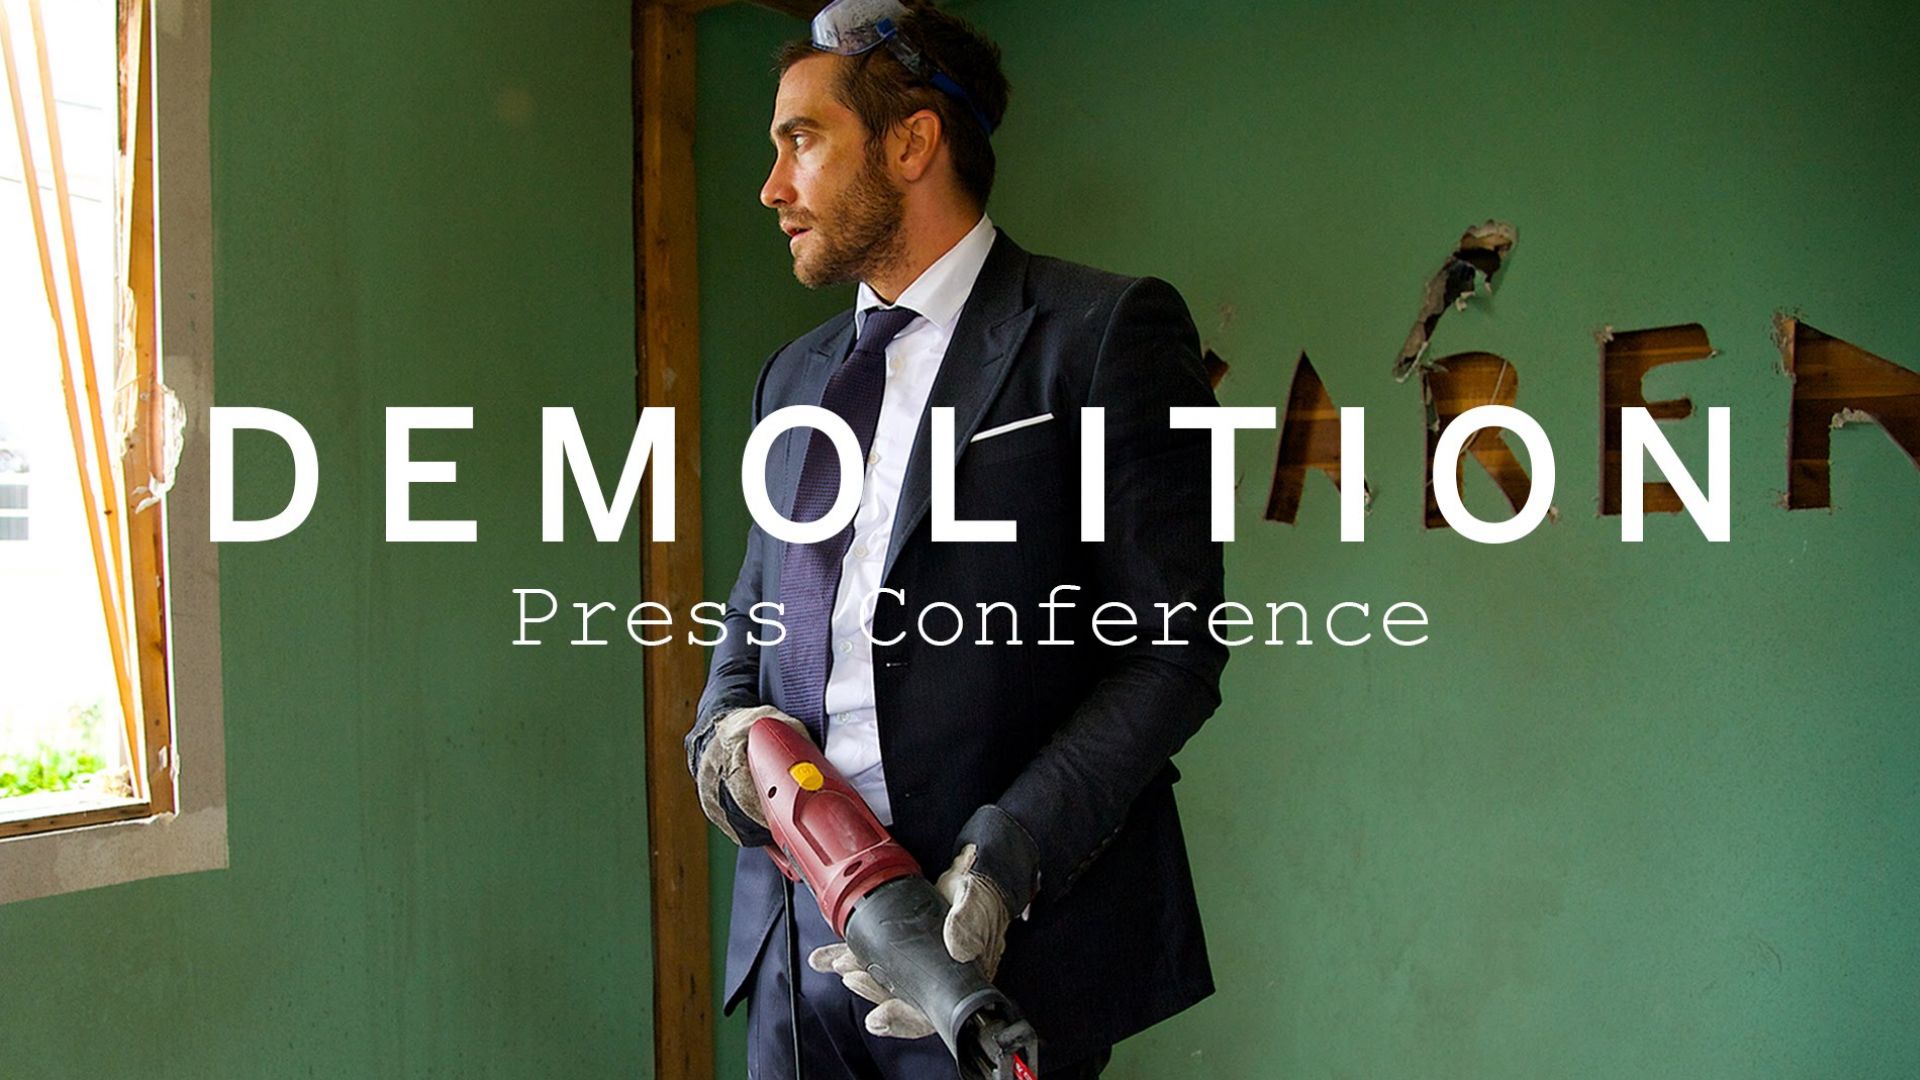 Watch the full TIFF Press Conference for &#039;Demolition&#039; with J